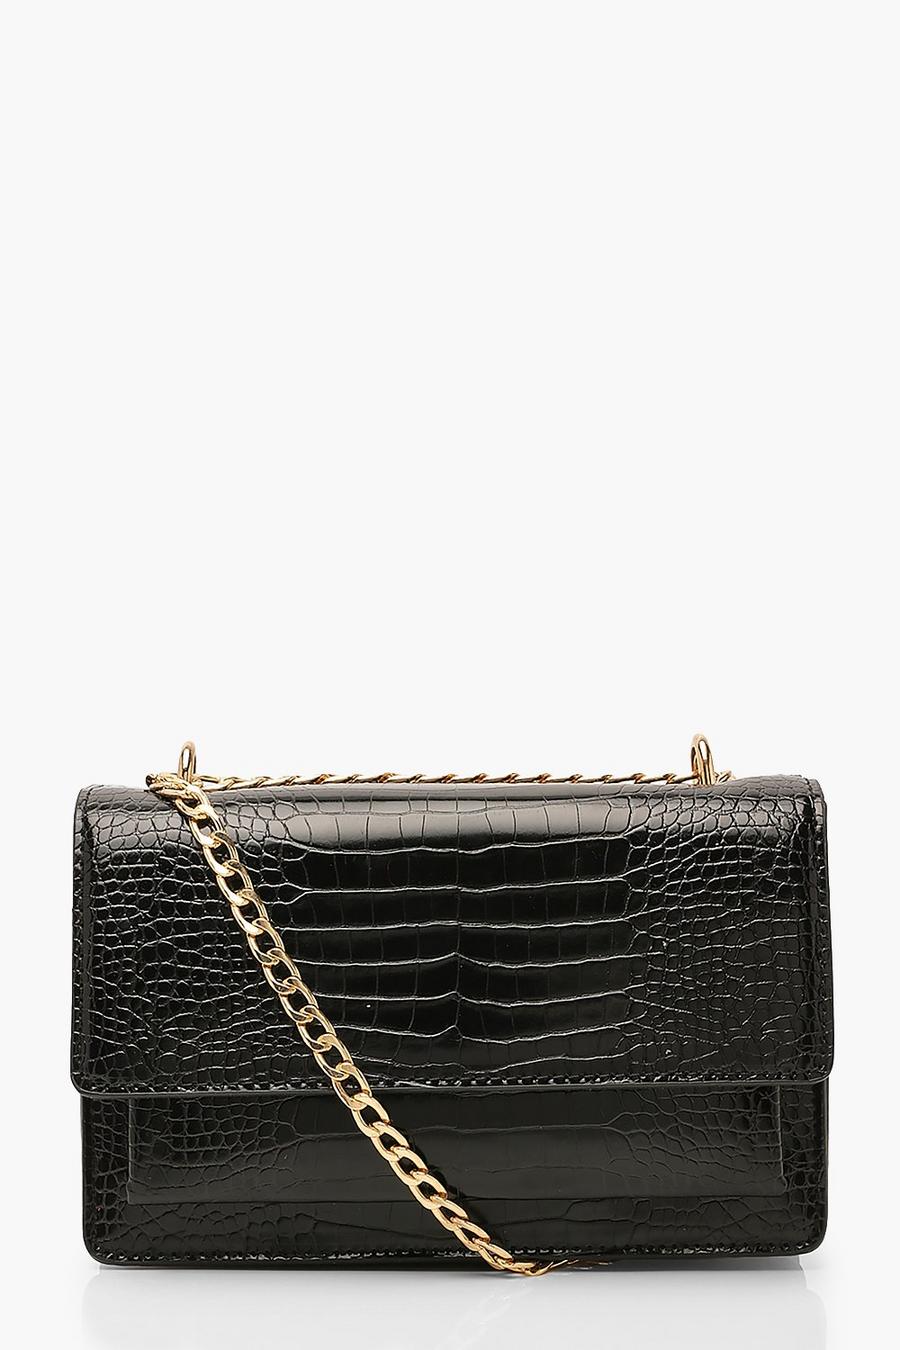 Black Croc Structured Cross Body & Chain Bag image number 1